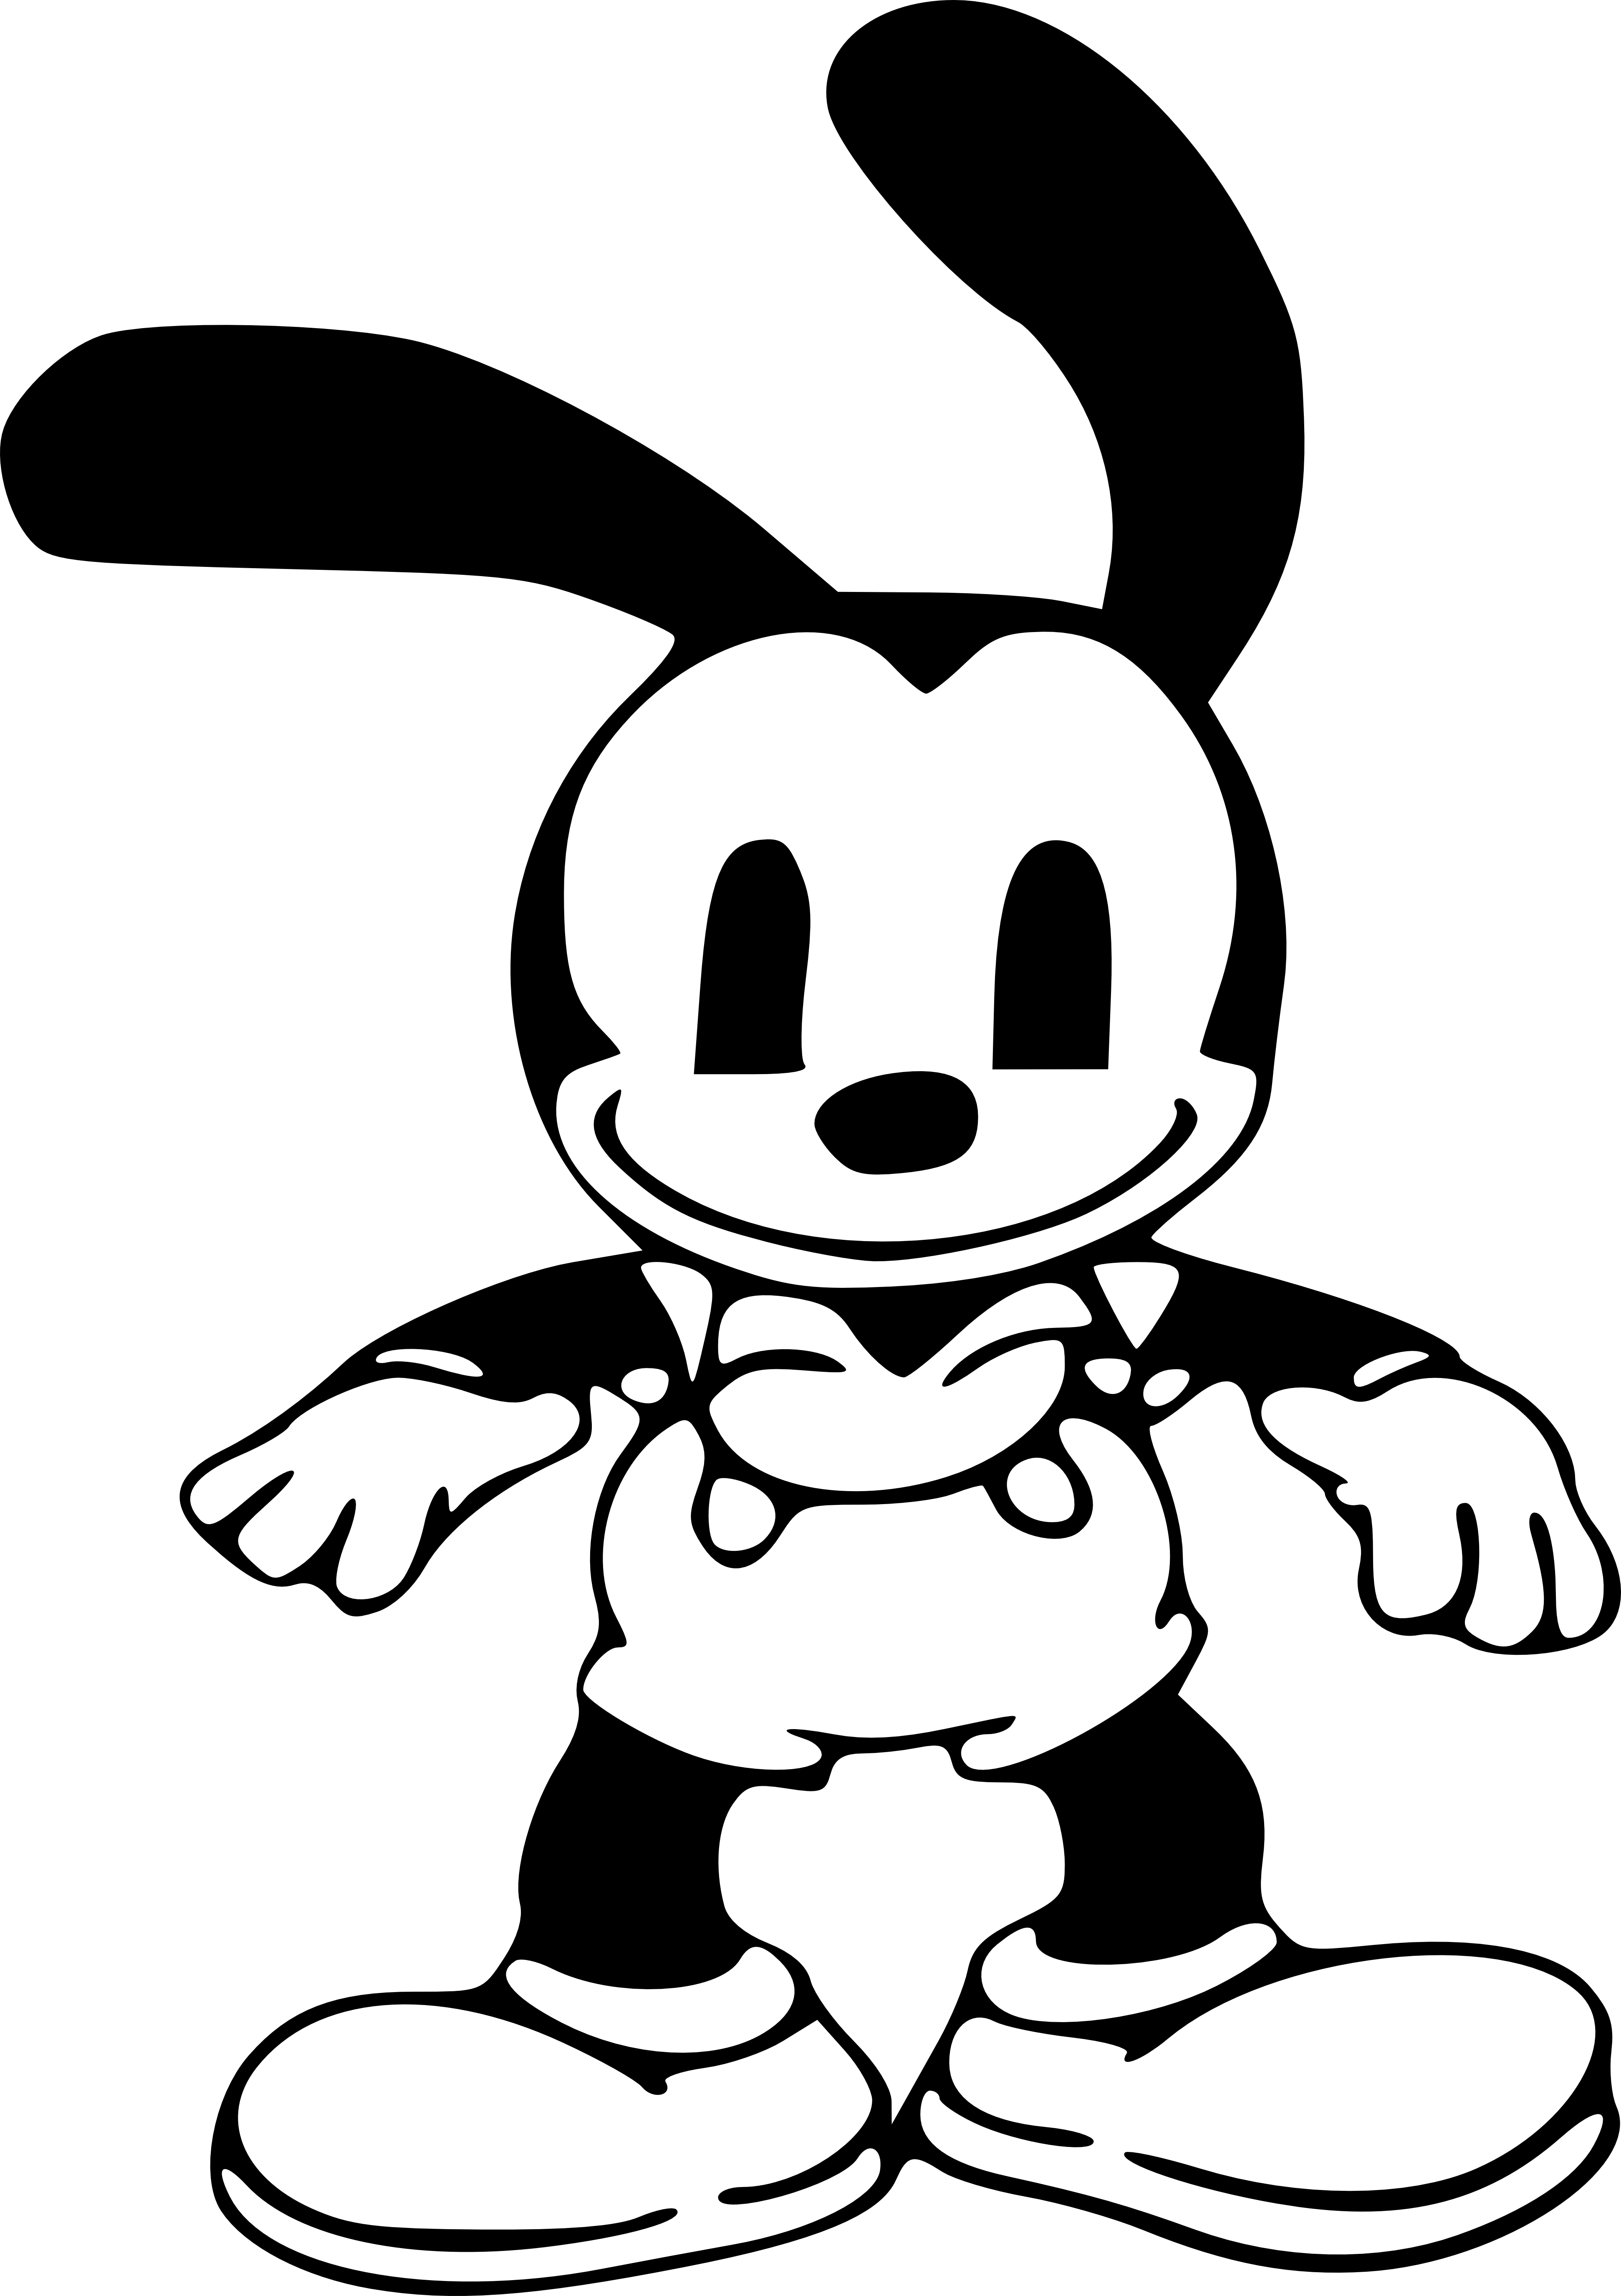 Download PNG image - Oswald The Lucky Rabbit PNG Transparent Image 